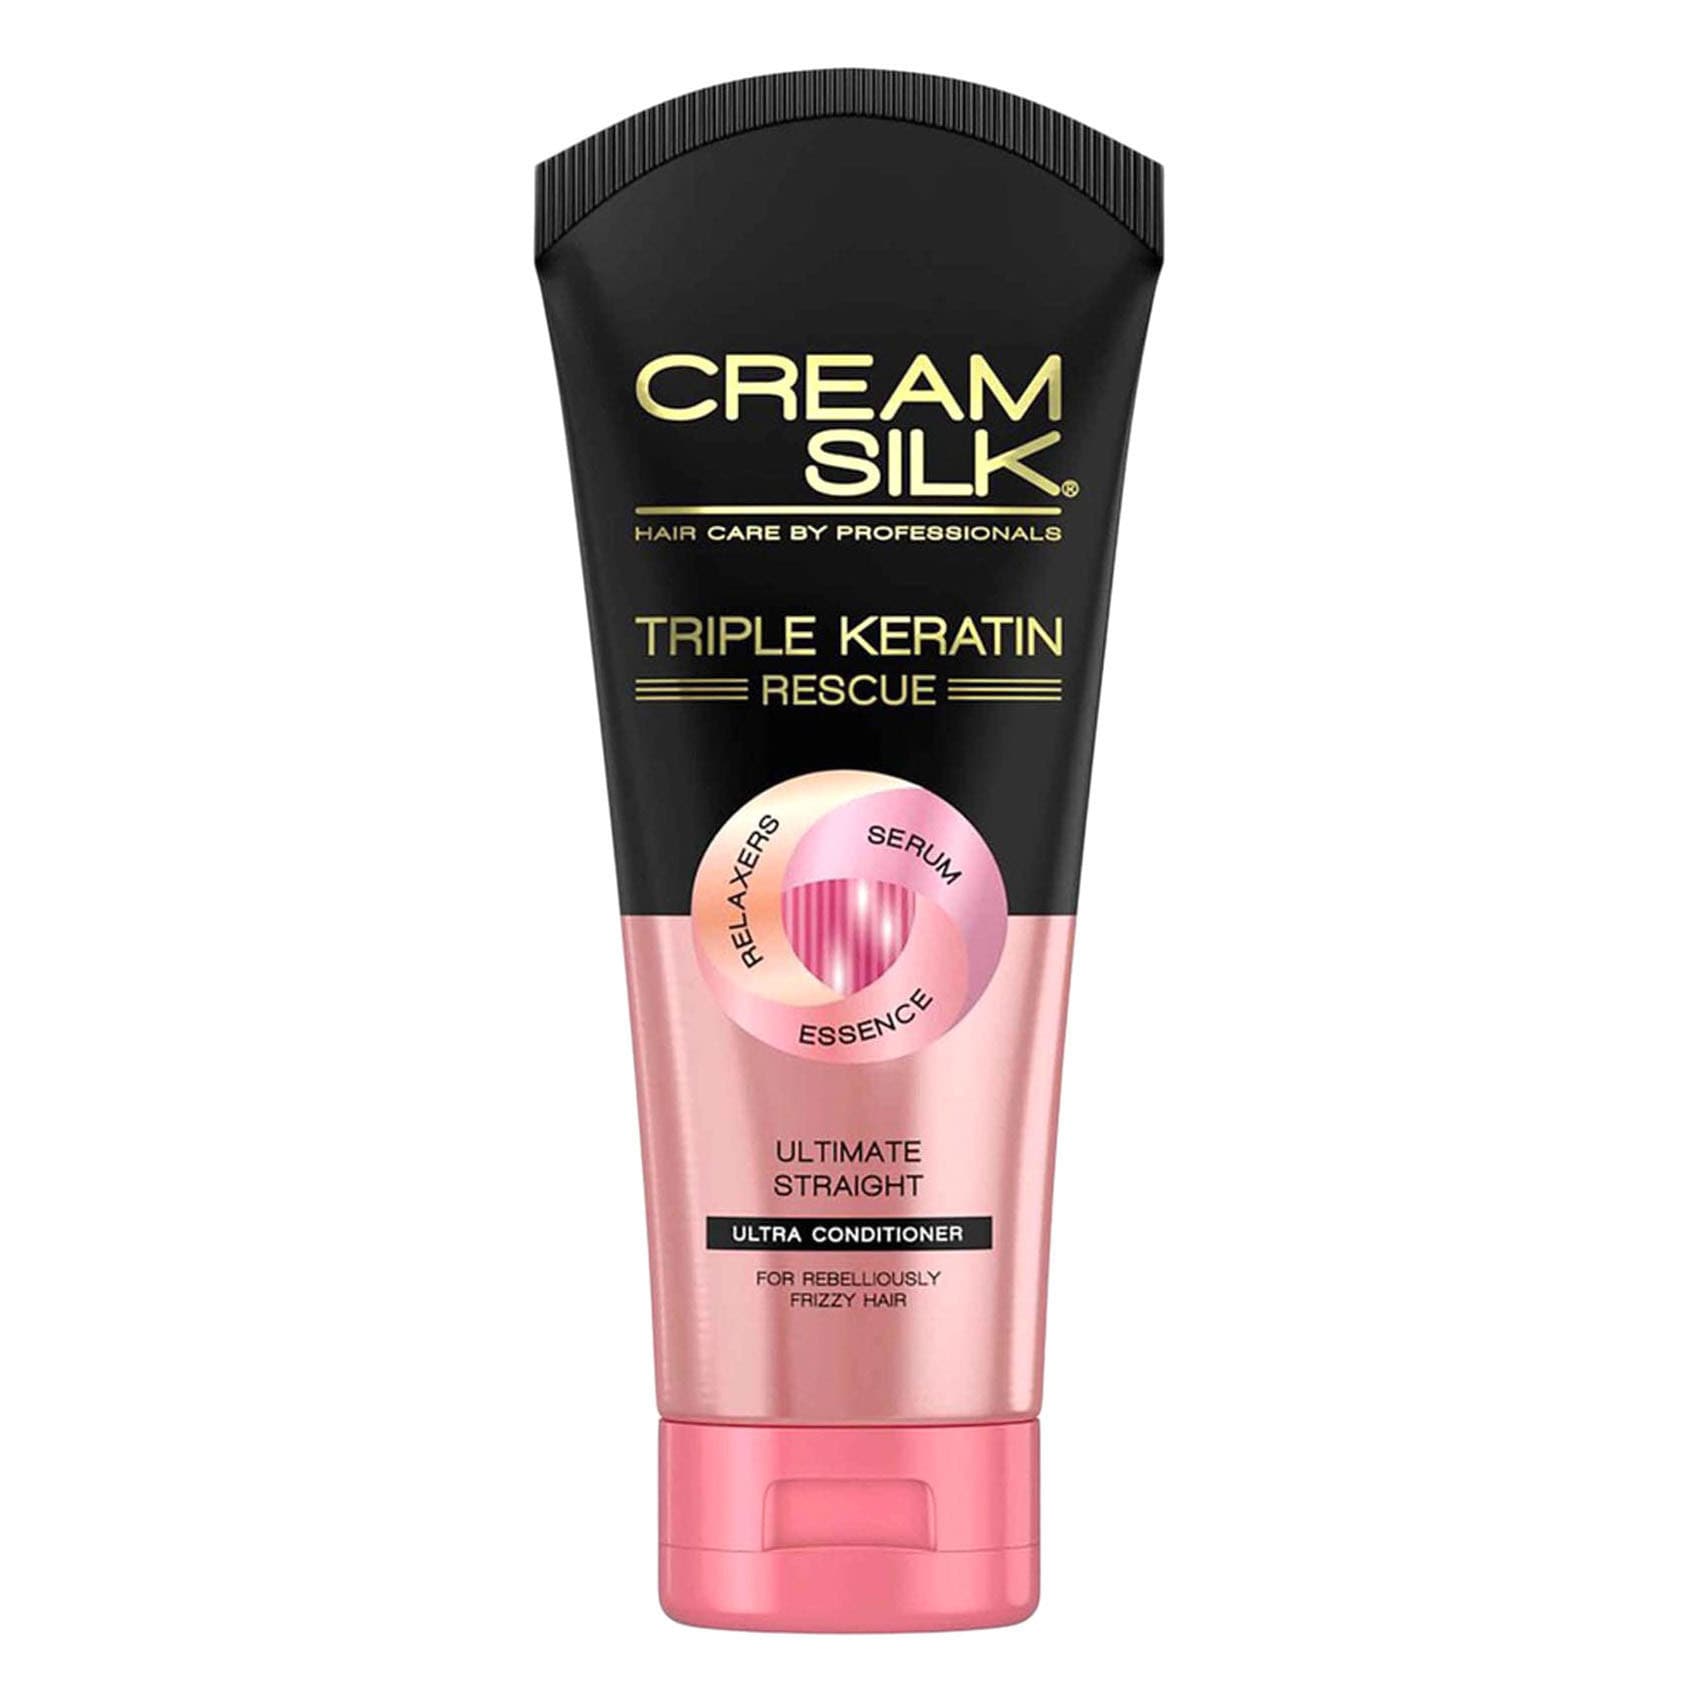 Buy Cream Silk Triple Keratin Rescue Conditioner Ultimate Straight With  Keratin Relaxers Serum  Essence 170ml Online Shop Beauty  Personal Care  on Carrefour UAE